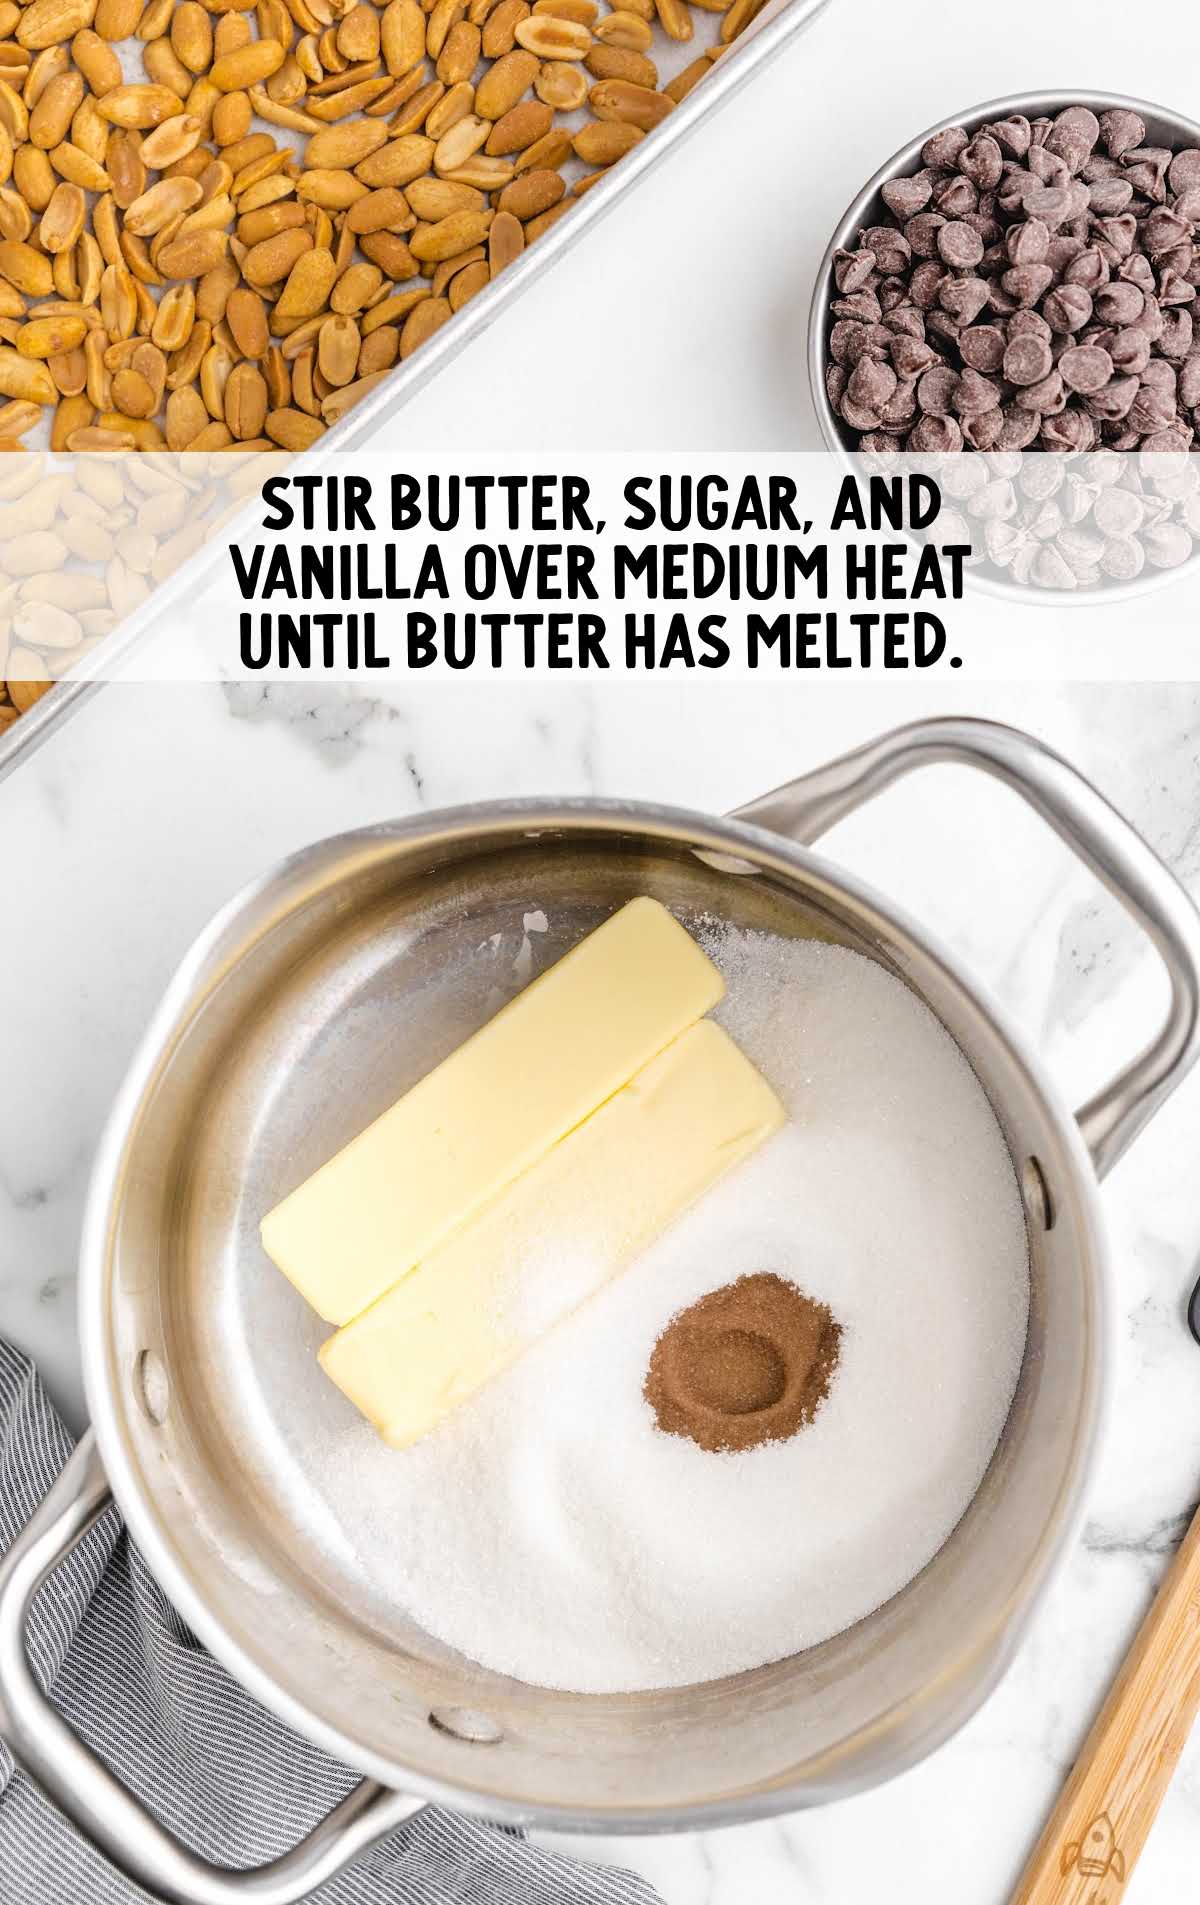 butter, sugar, and vanilla stirred together